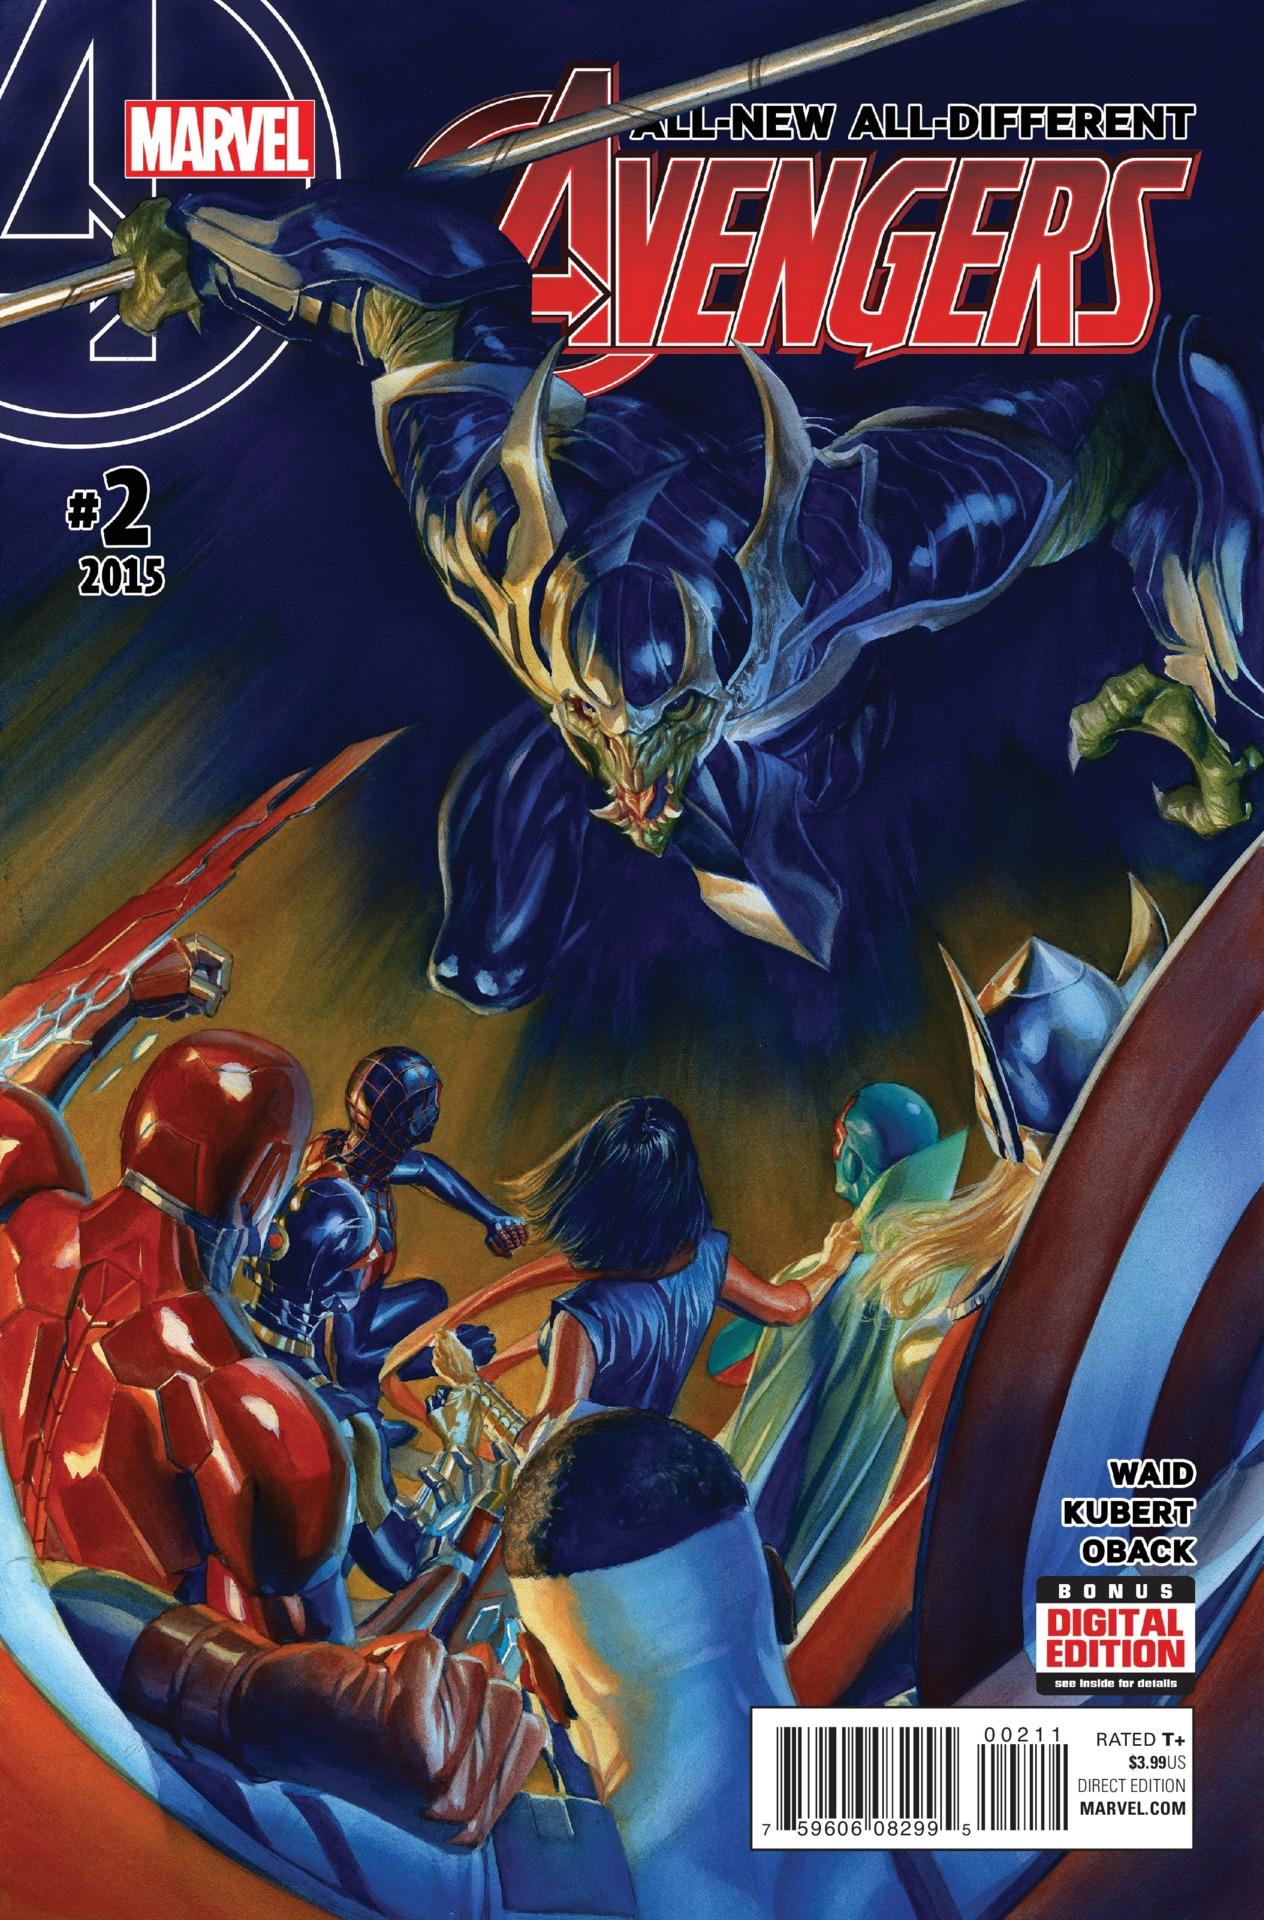 All-New, All-Different Avengers Vol. 1 #2